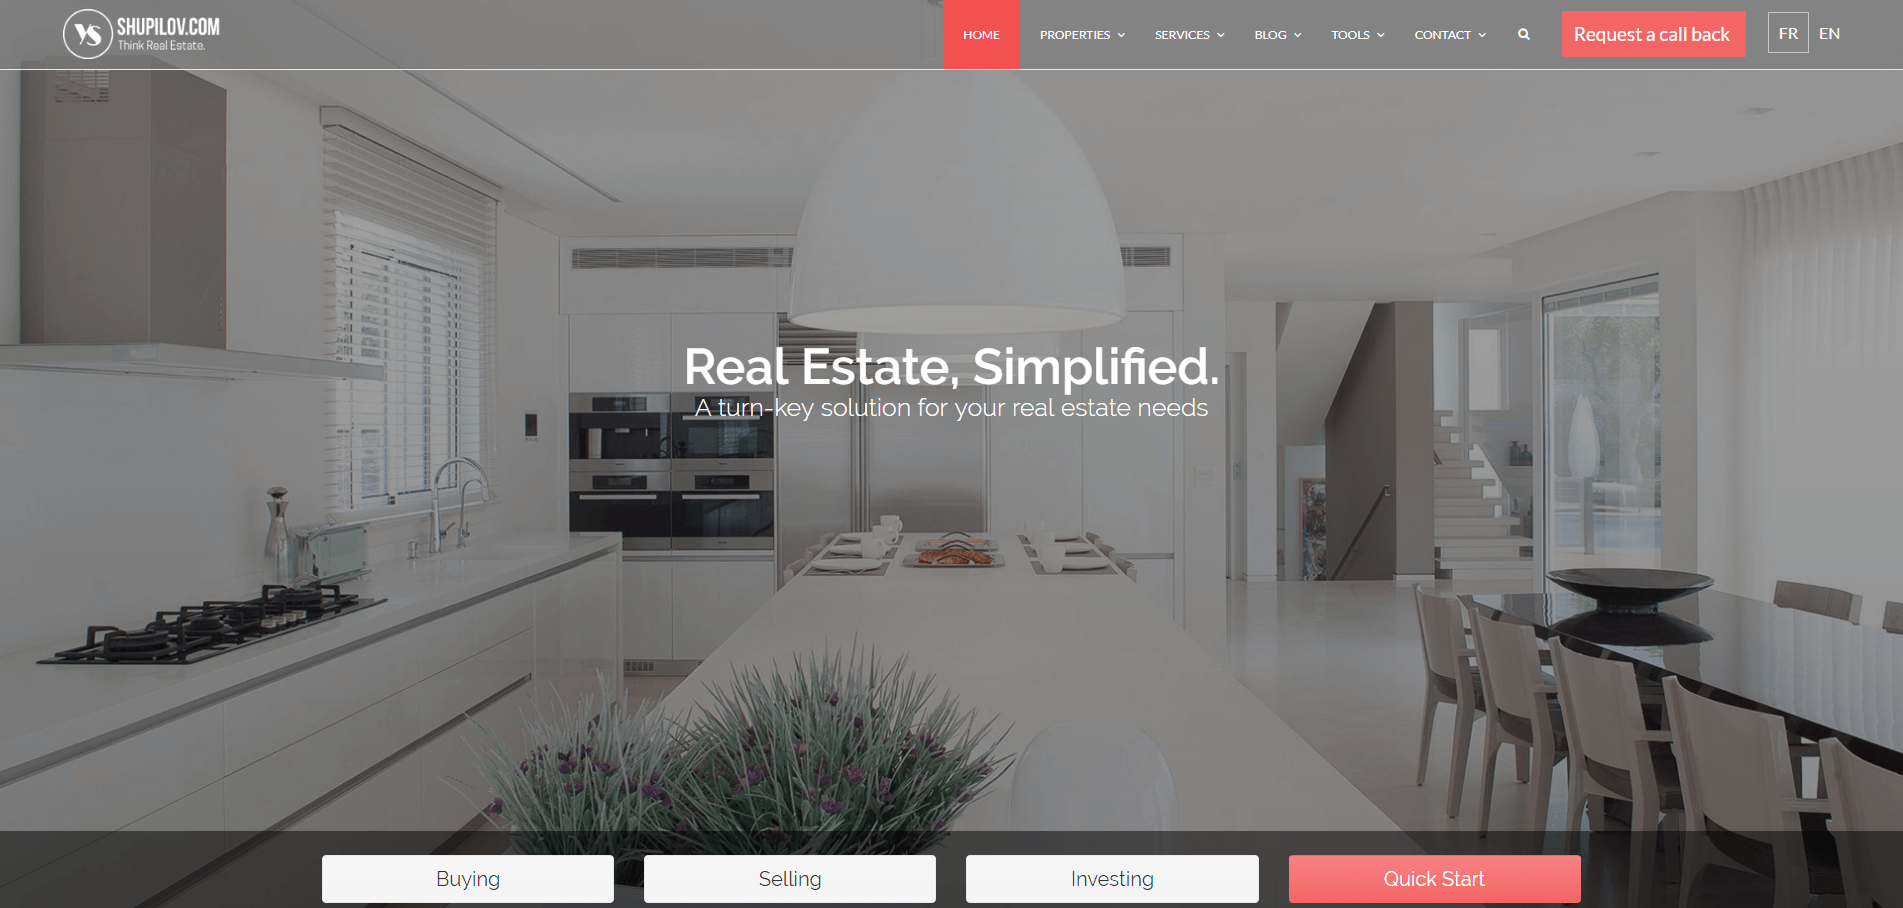  Incredible!  We listed 101 of the best real estate websites.  We ranked each site 1-101 and reviewed them all.  Here's shupilov.  Want to see who made the list? 